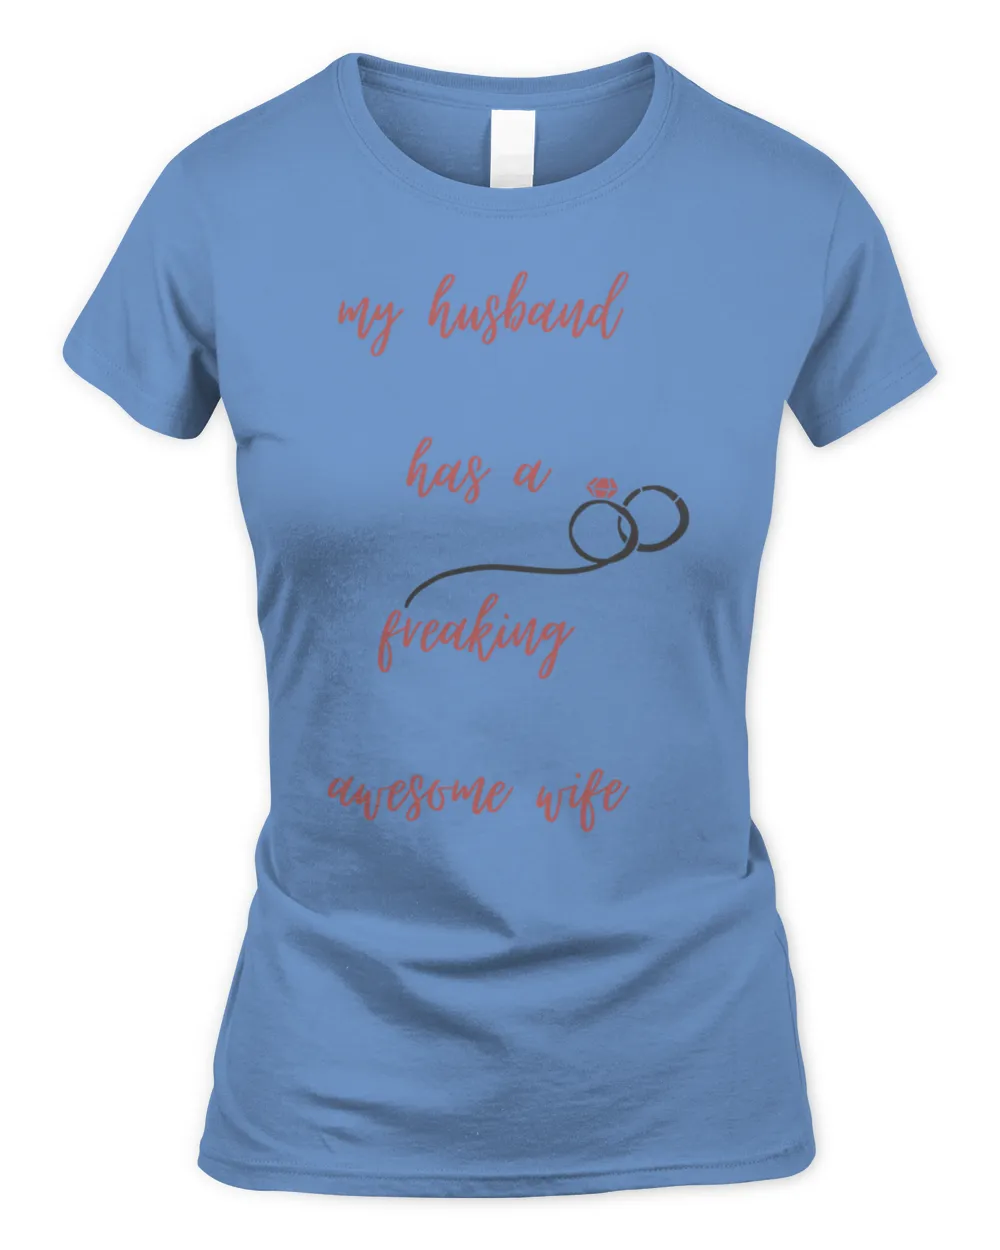 my husband has a freaking awesome wife Tshirt8732 T-Shirt